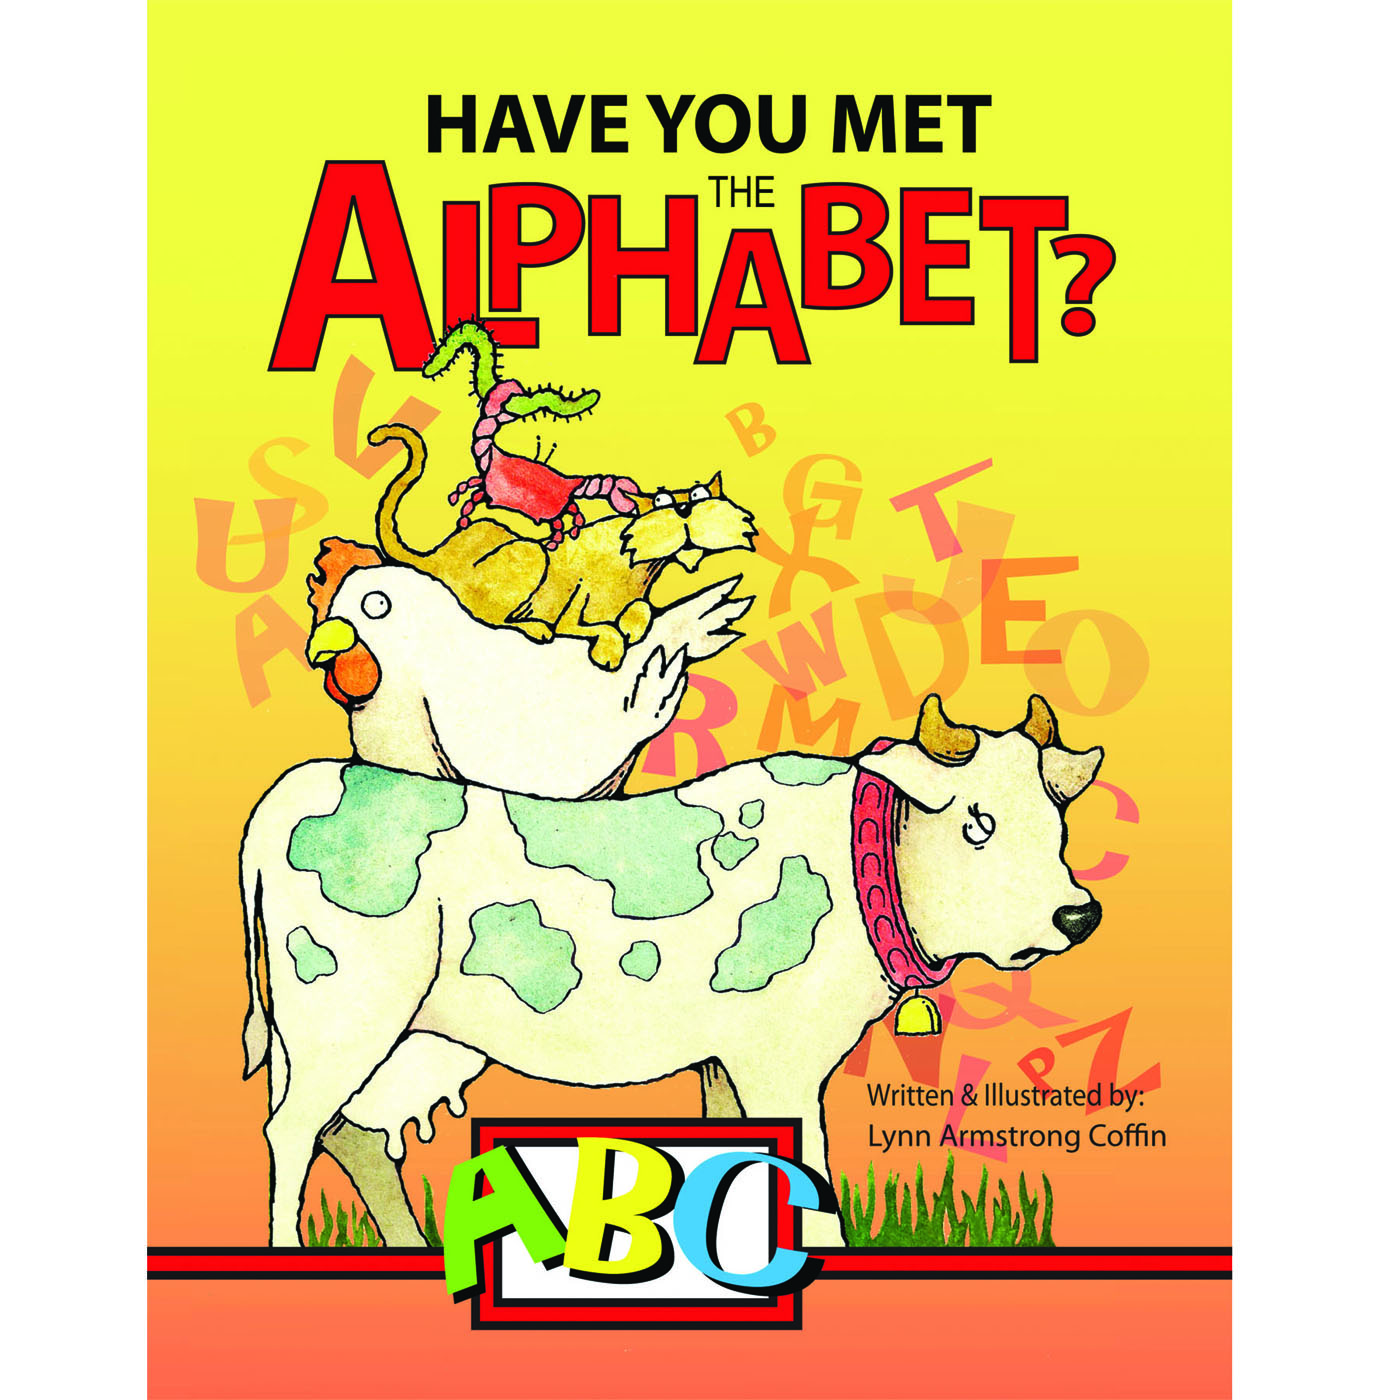 Have You Met the Alphabet? - Lynn Armstrong Coffin